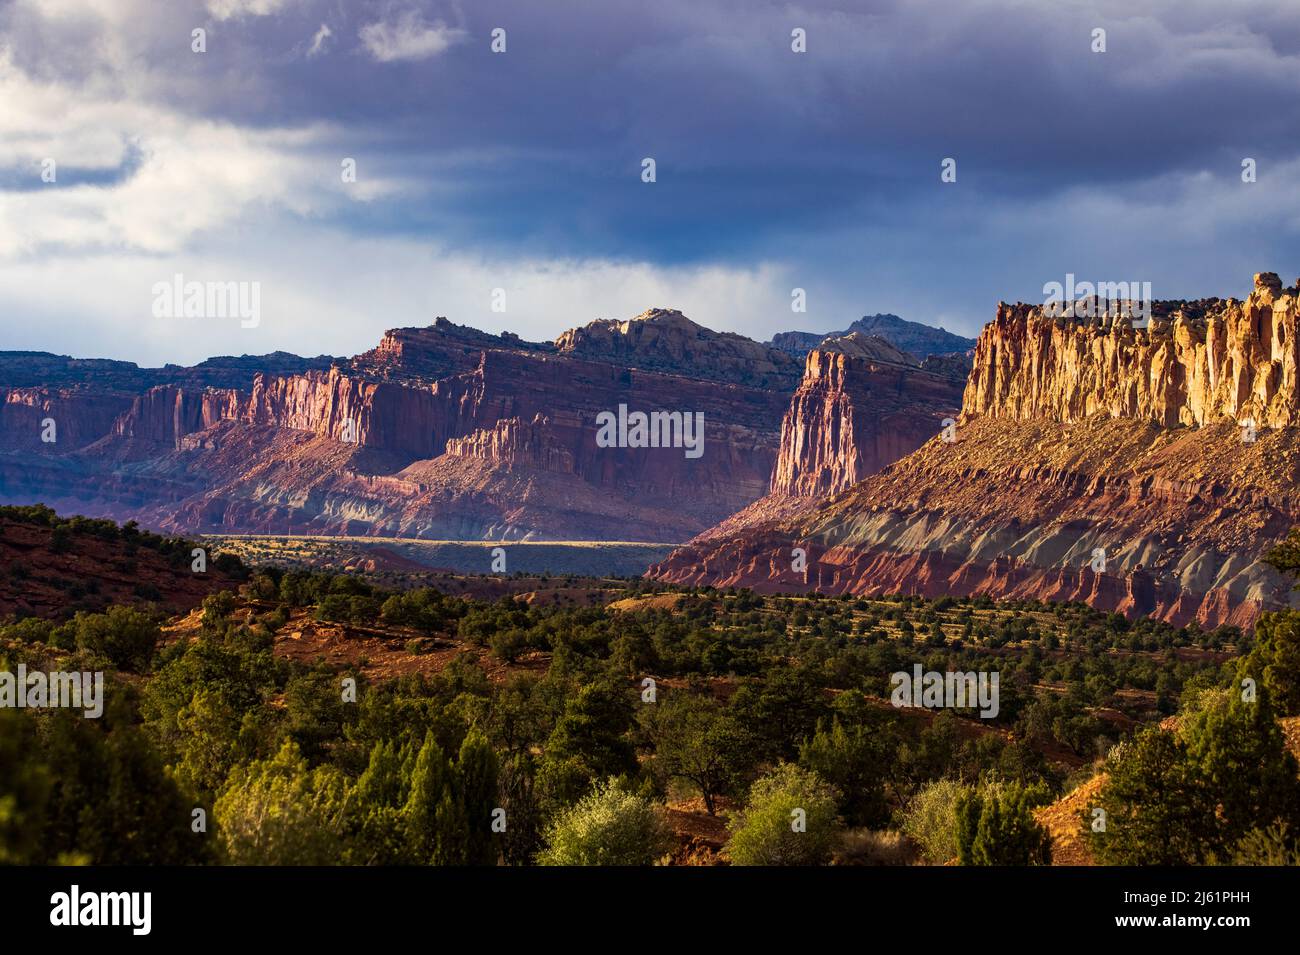 This is a late afternoon view of the majestic red rock cliffs of Capitol Reef National Park, Torrey, Wayne County, Utah, USA. This view looks north fr Stock Photo